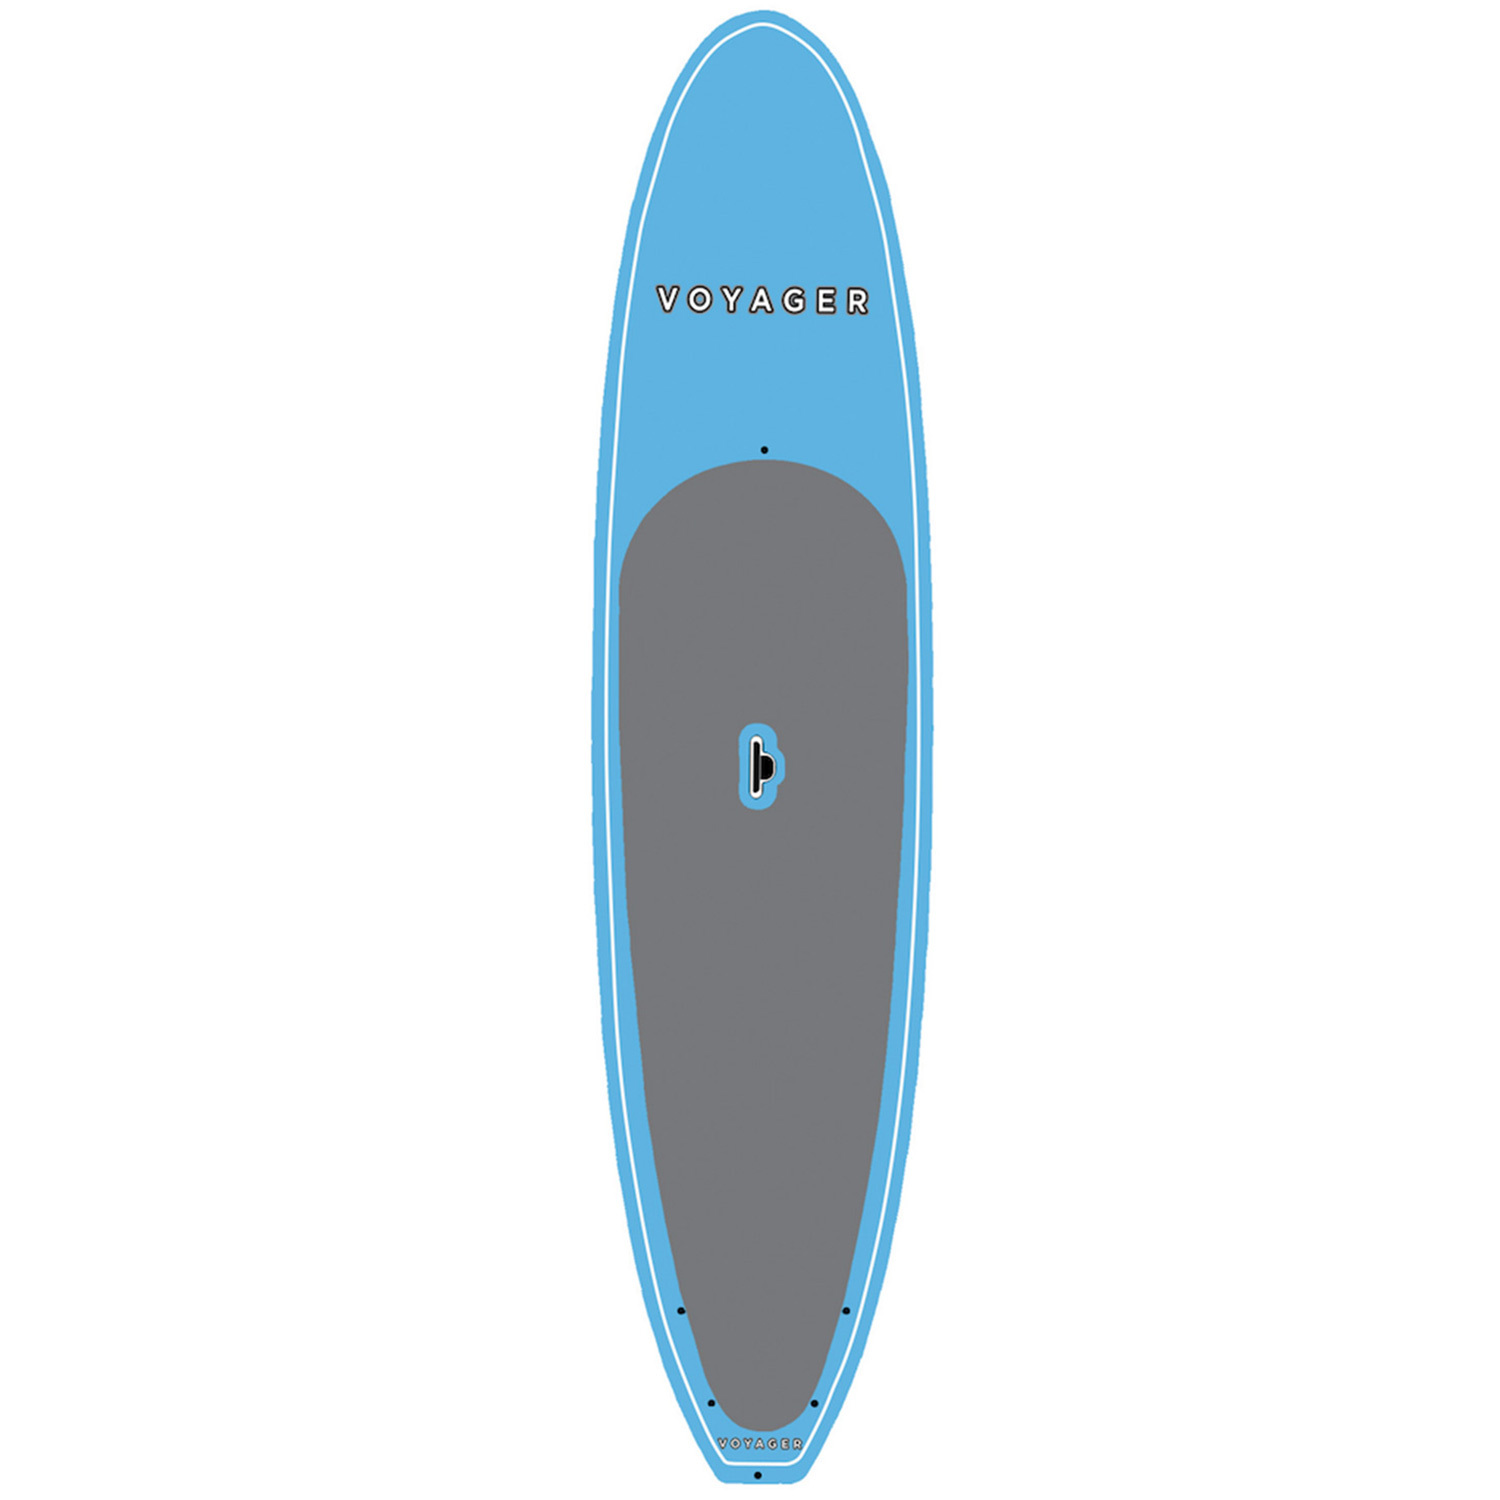 voyager paddle board 11 6